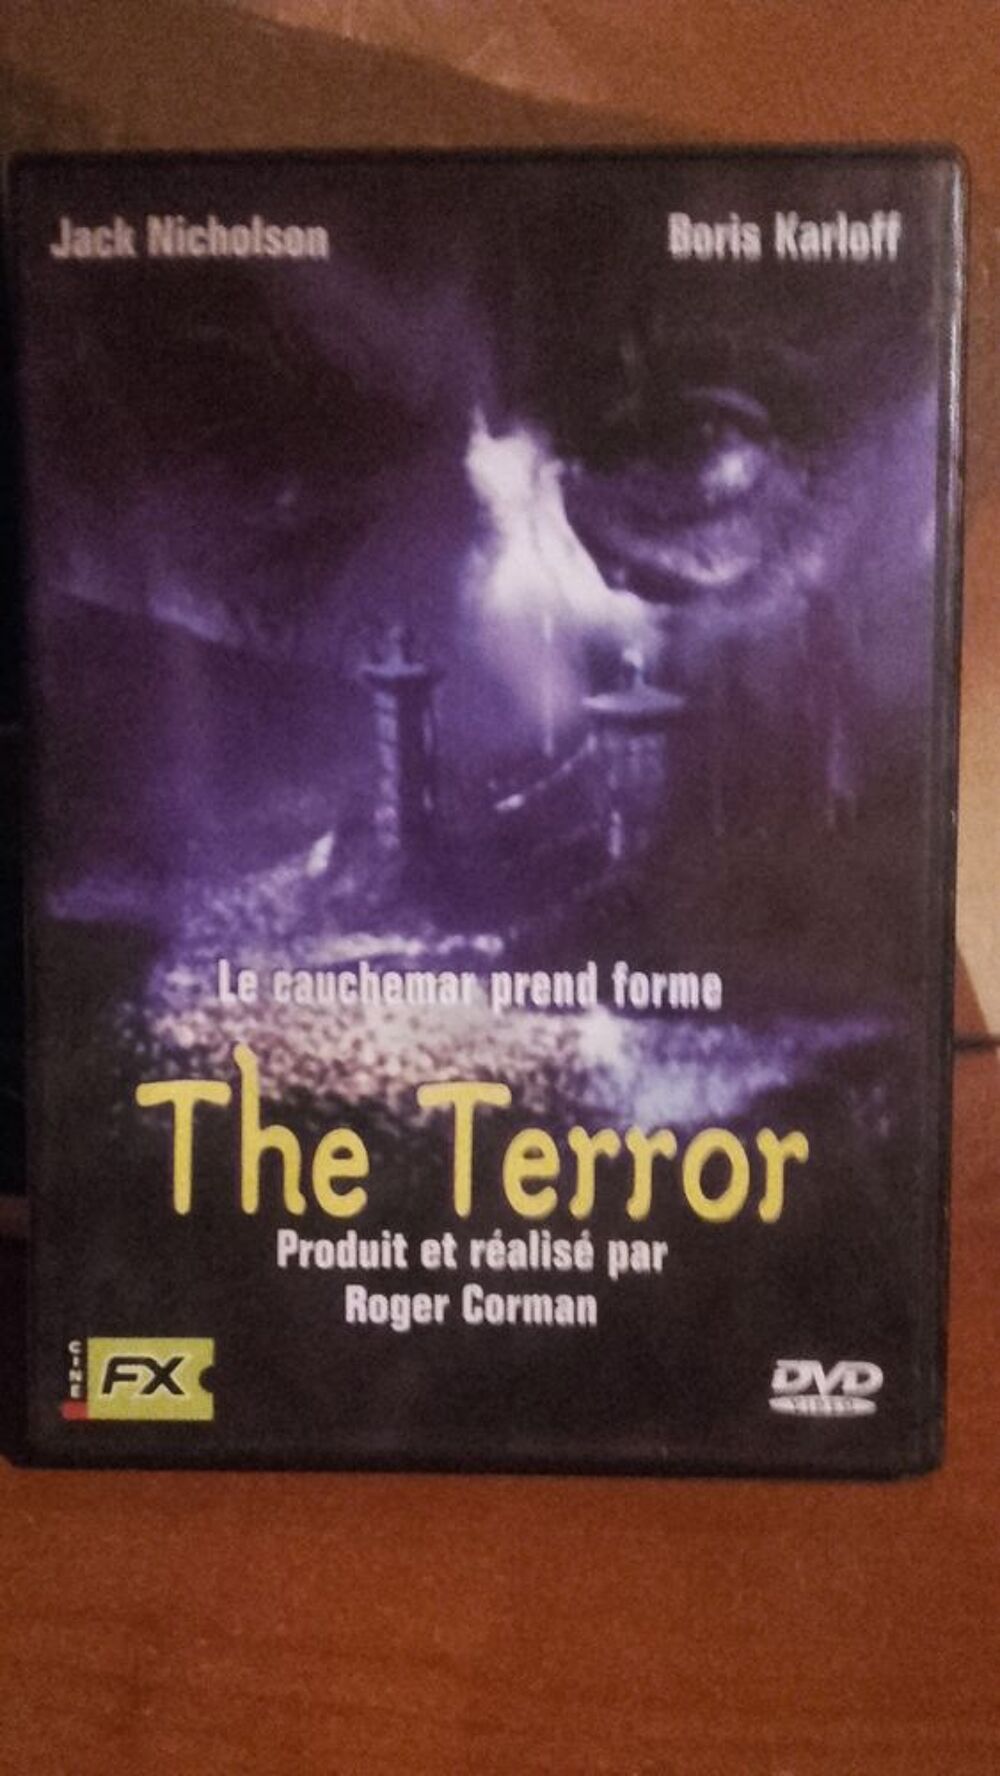 DVD Ugly
The terror
Beyond justice. Livraison possible. DVD et blu-ray